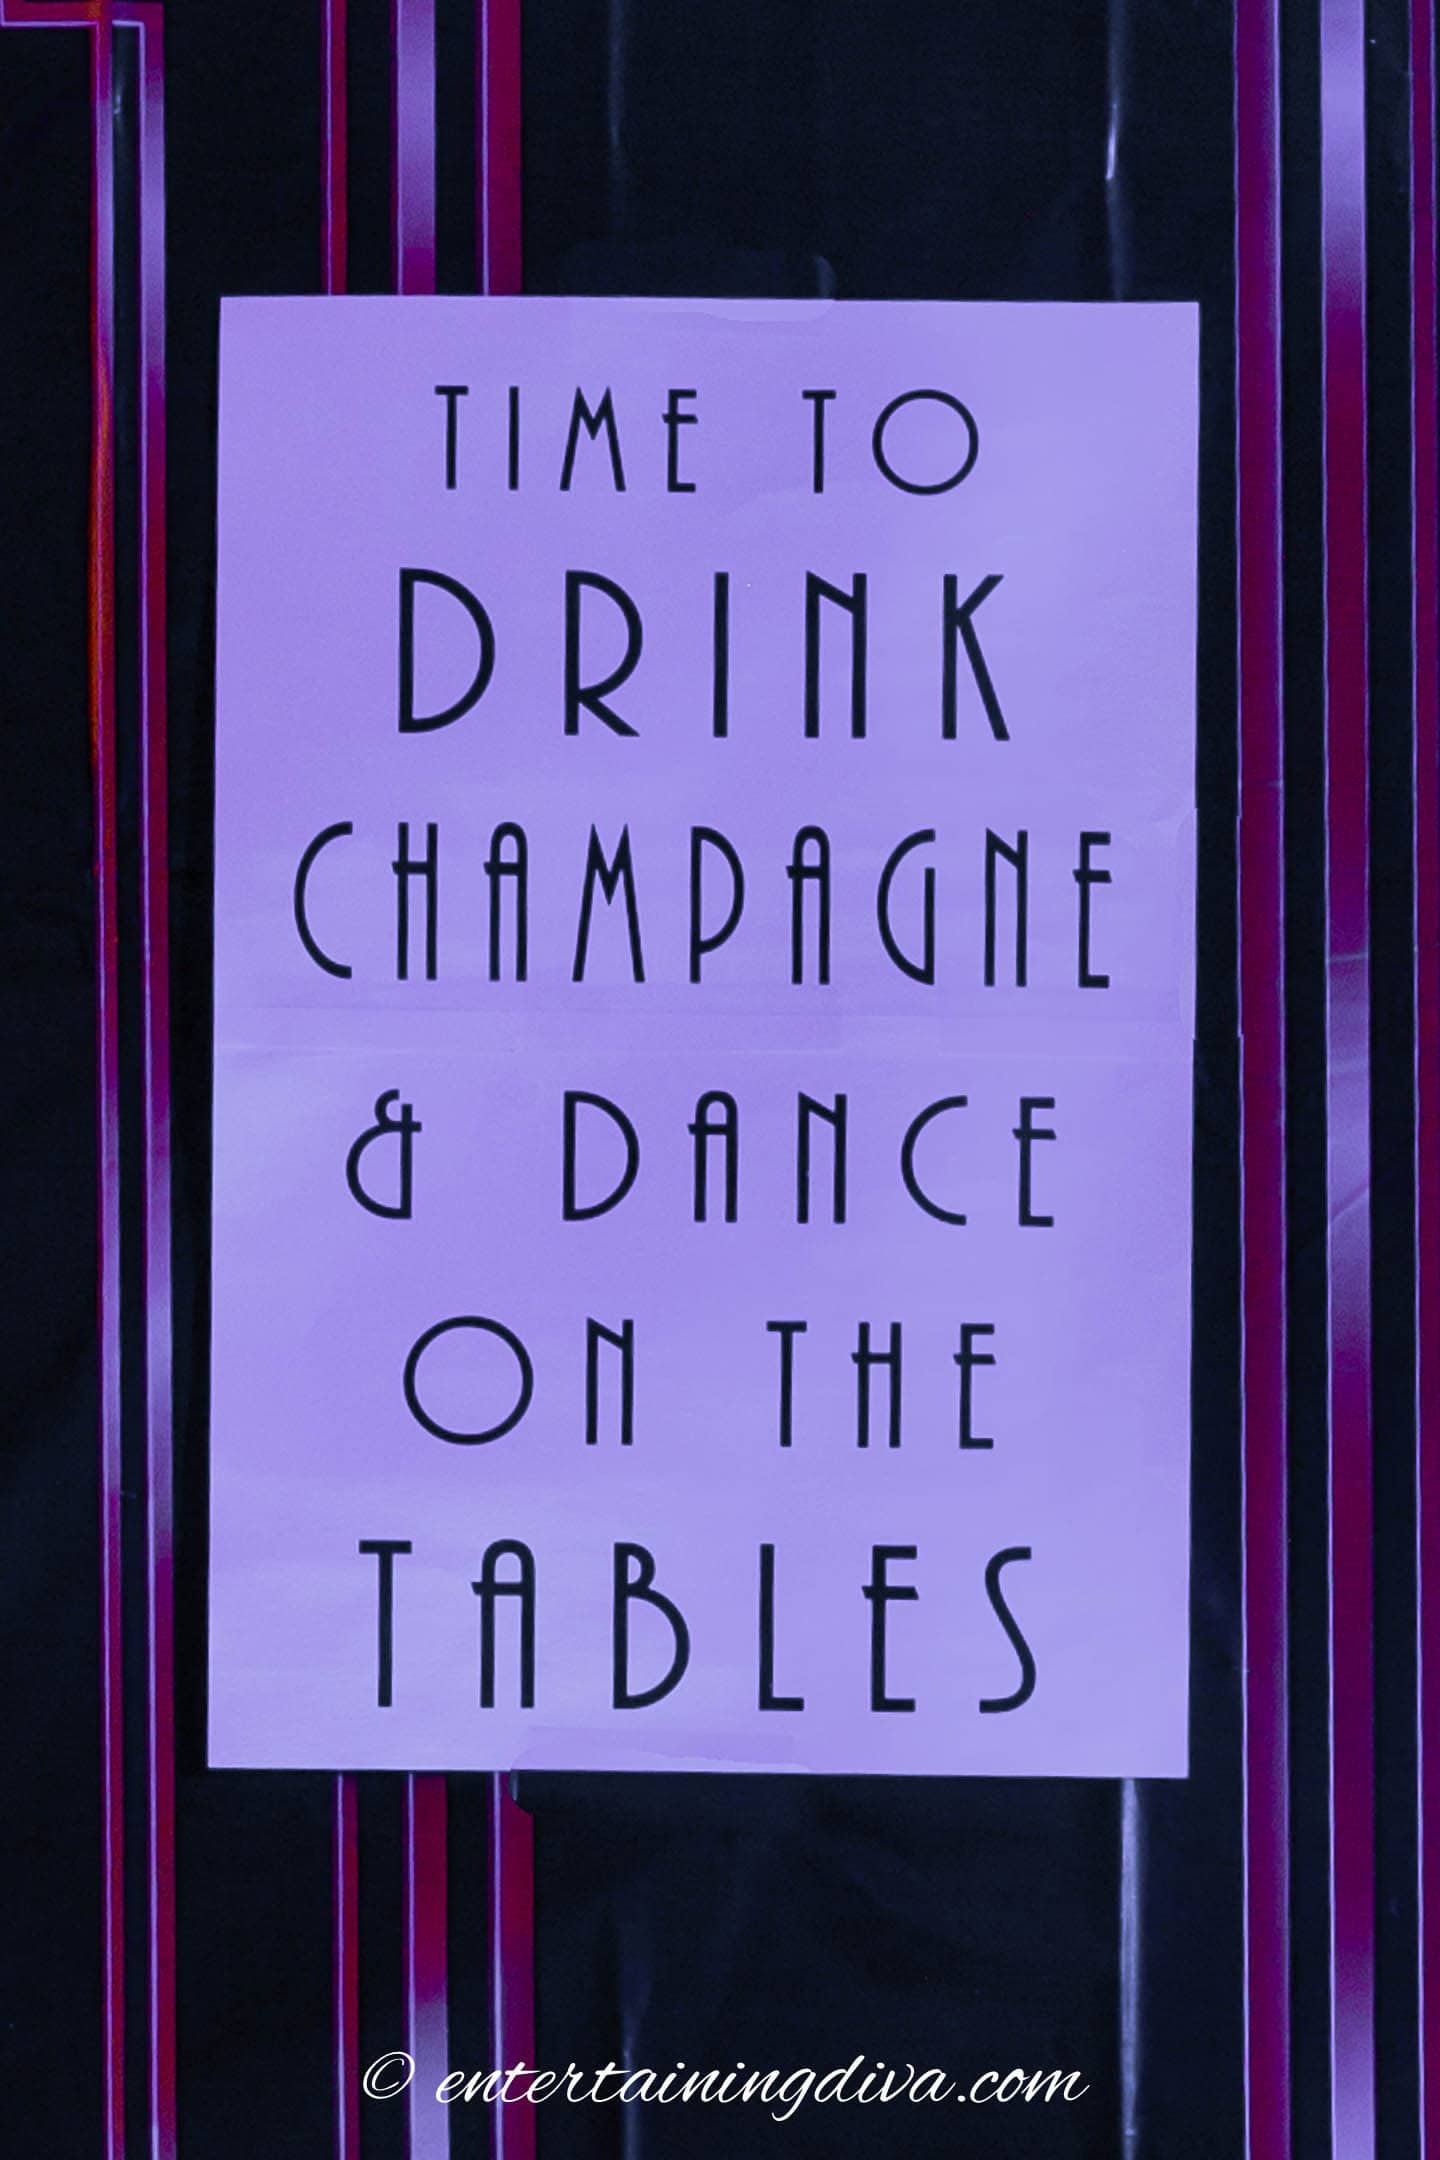 "Time to drink champagne & dance on the tables" sign on the wall